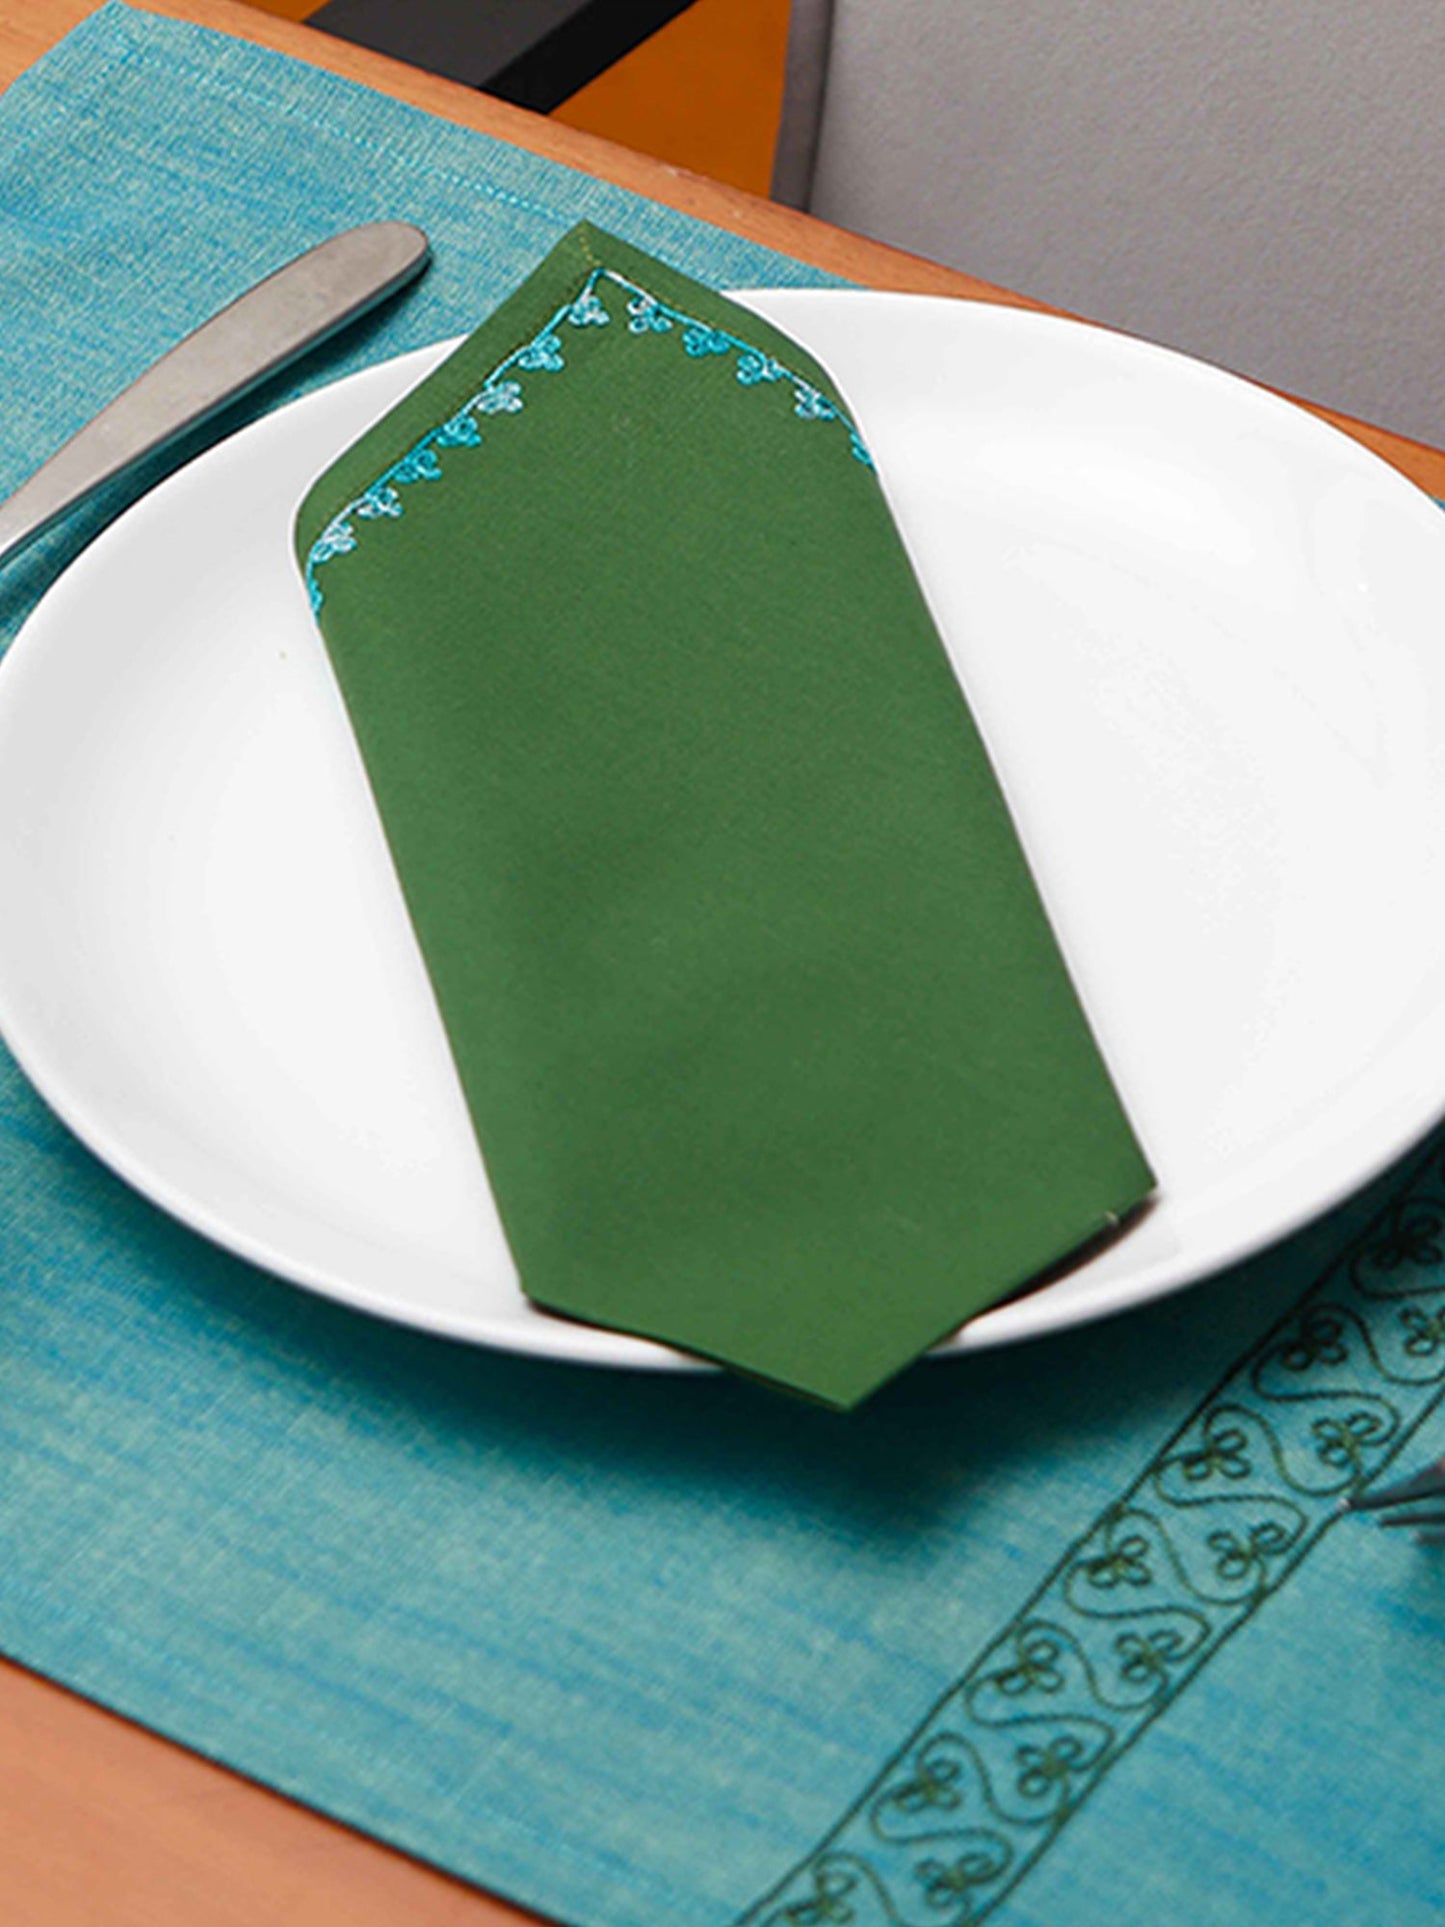 embroidered dinner table mats and napkins in contrast colors - 13x19 inch